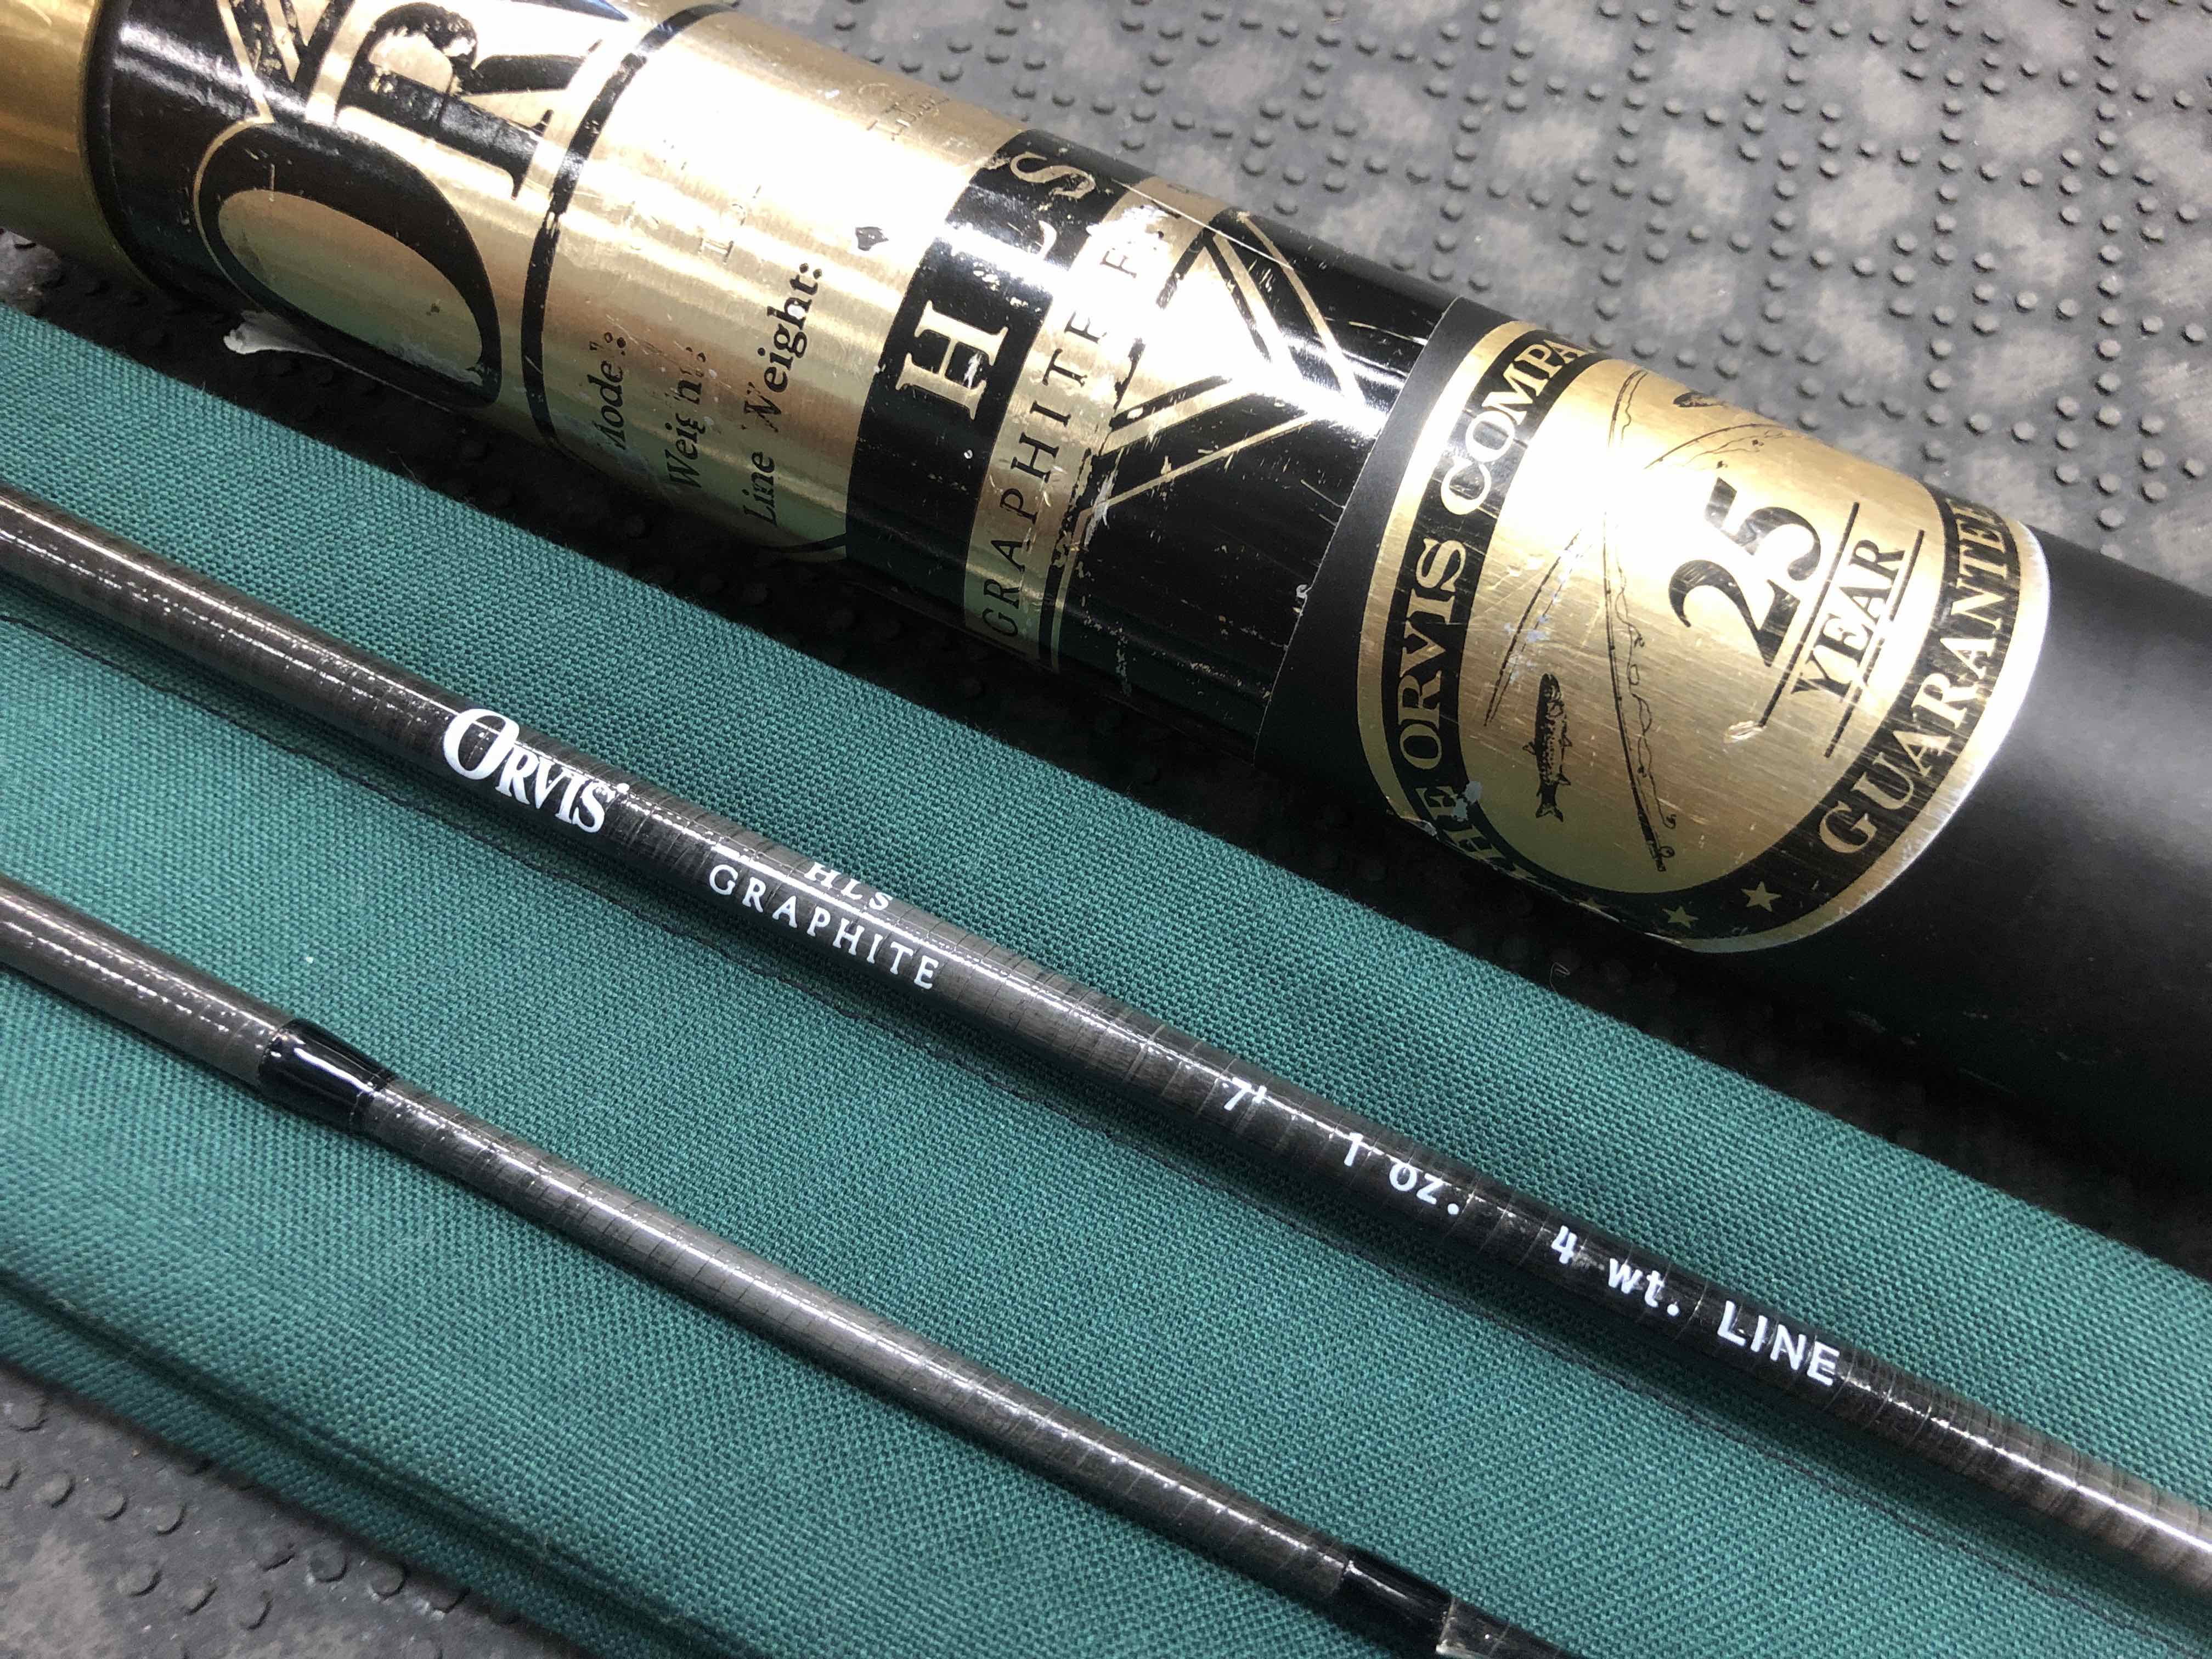 SOLD! – Orvis Superfine HLS Graphite 7′ 2PC 4WT 1oz Fly Rod – LIKE